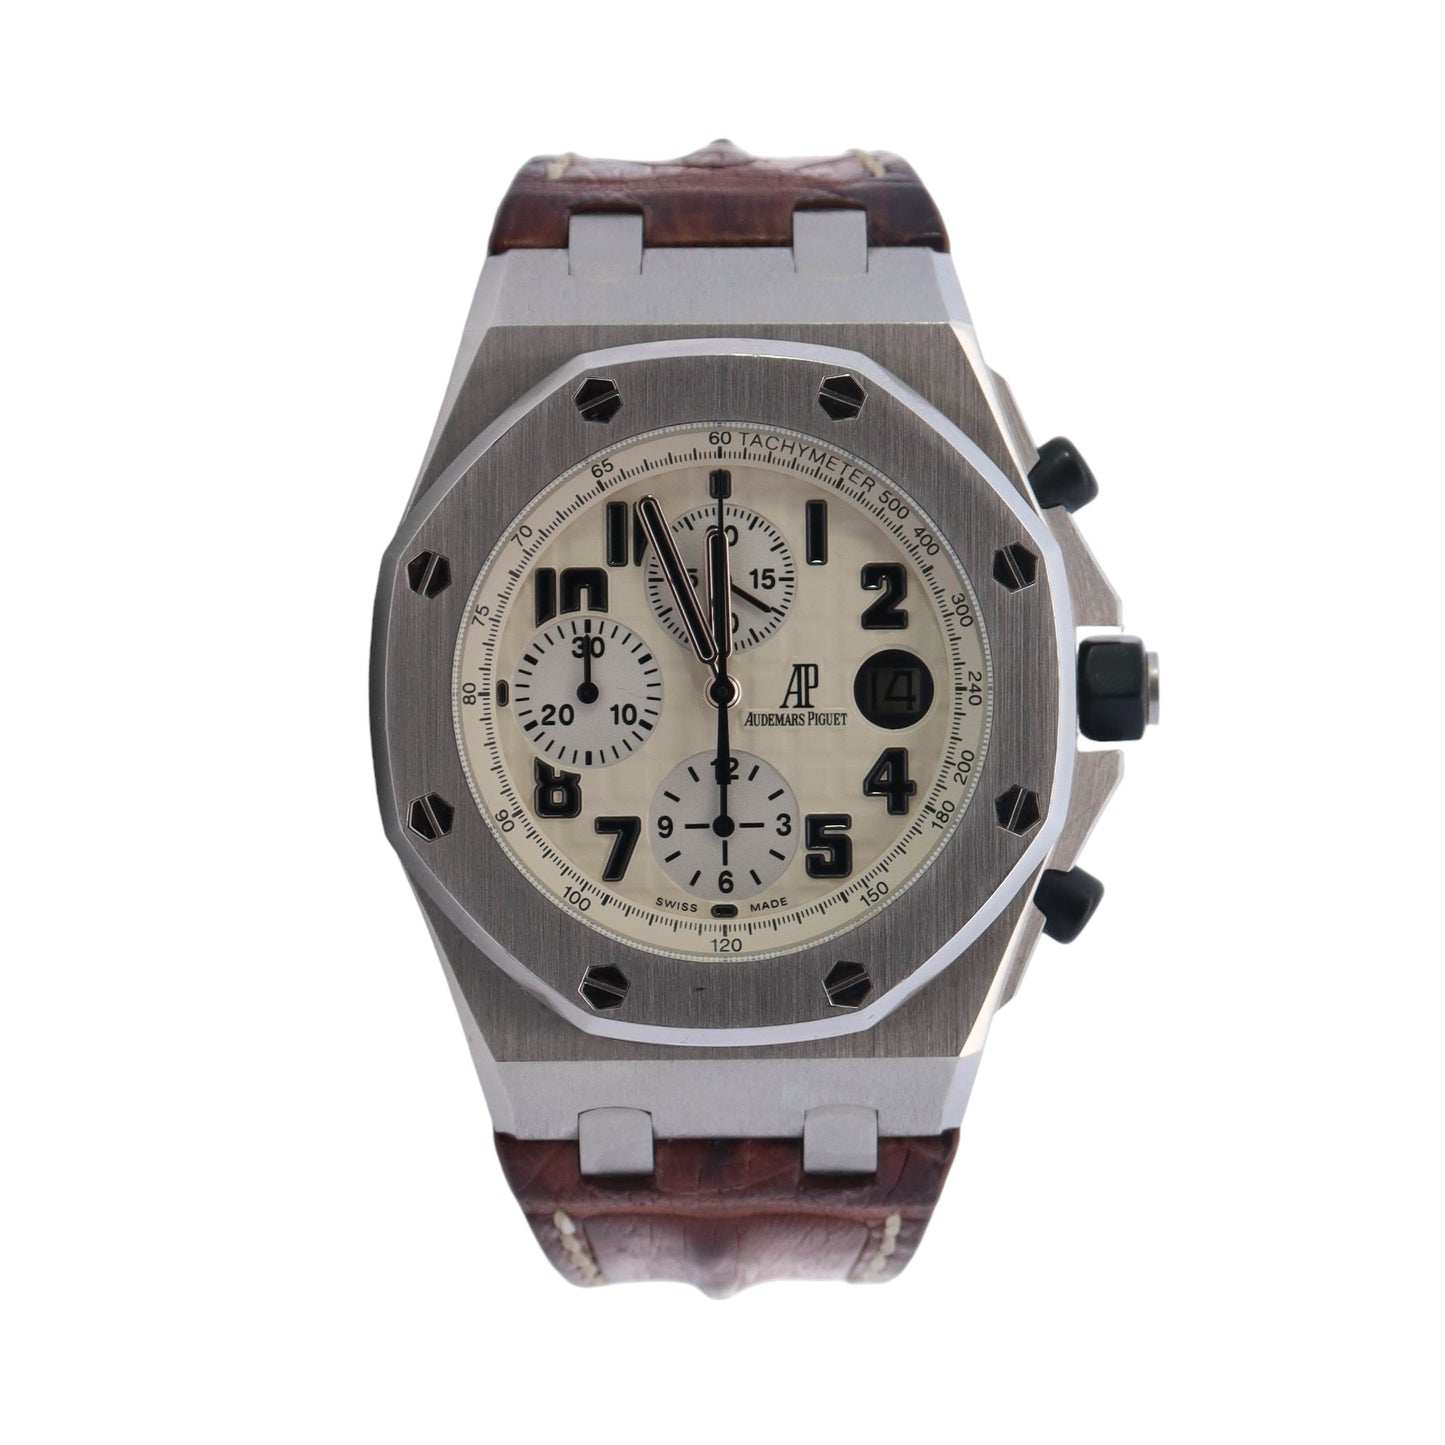 Audemars Piguet Royal Oak Offshore Stainless Steel 42mm Offwhite Chronograph Arabic Dial Watch - Happy Jewelers Fine Jewelry Lifetime Warranty